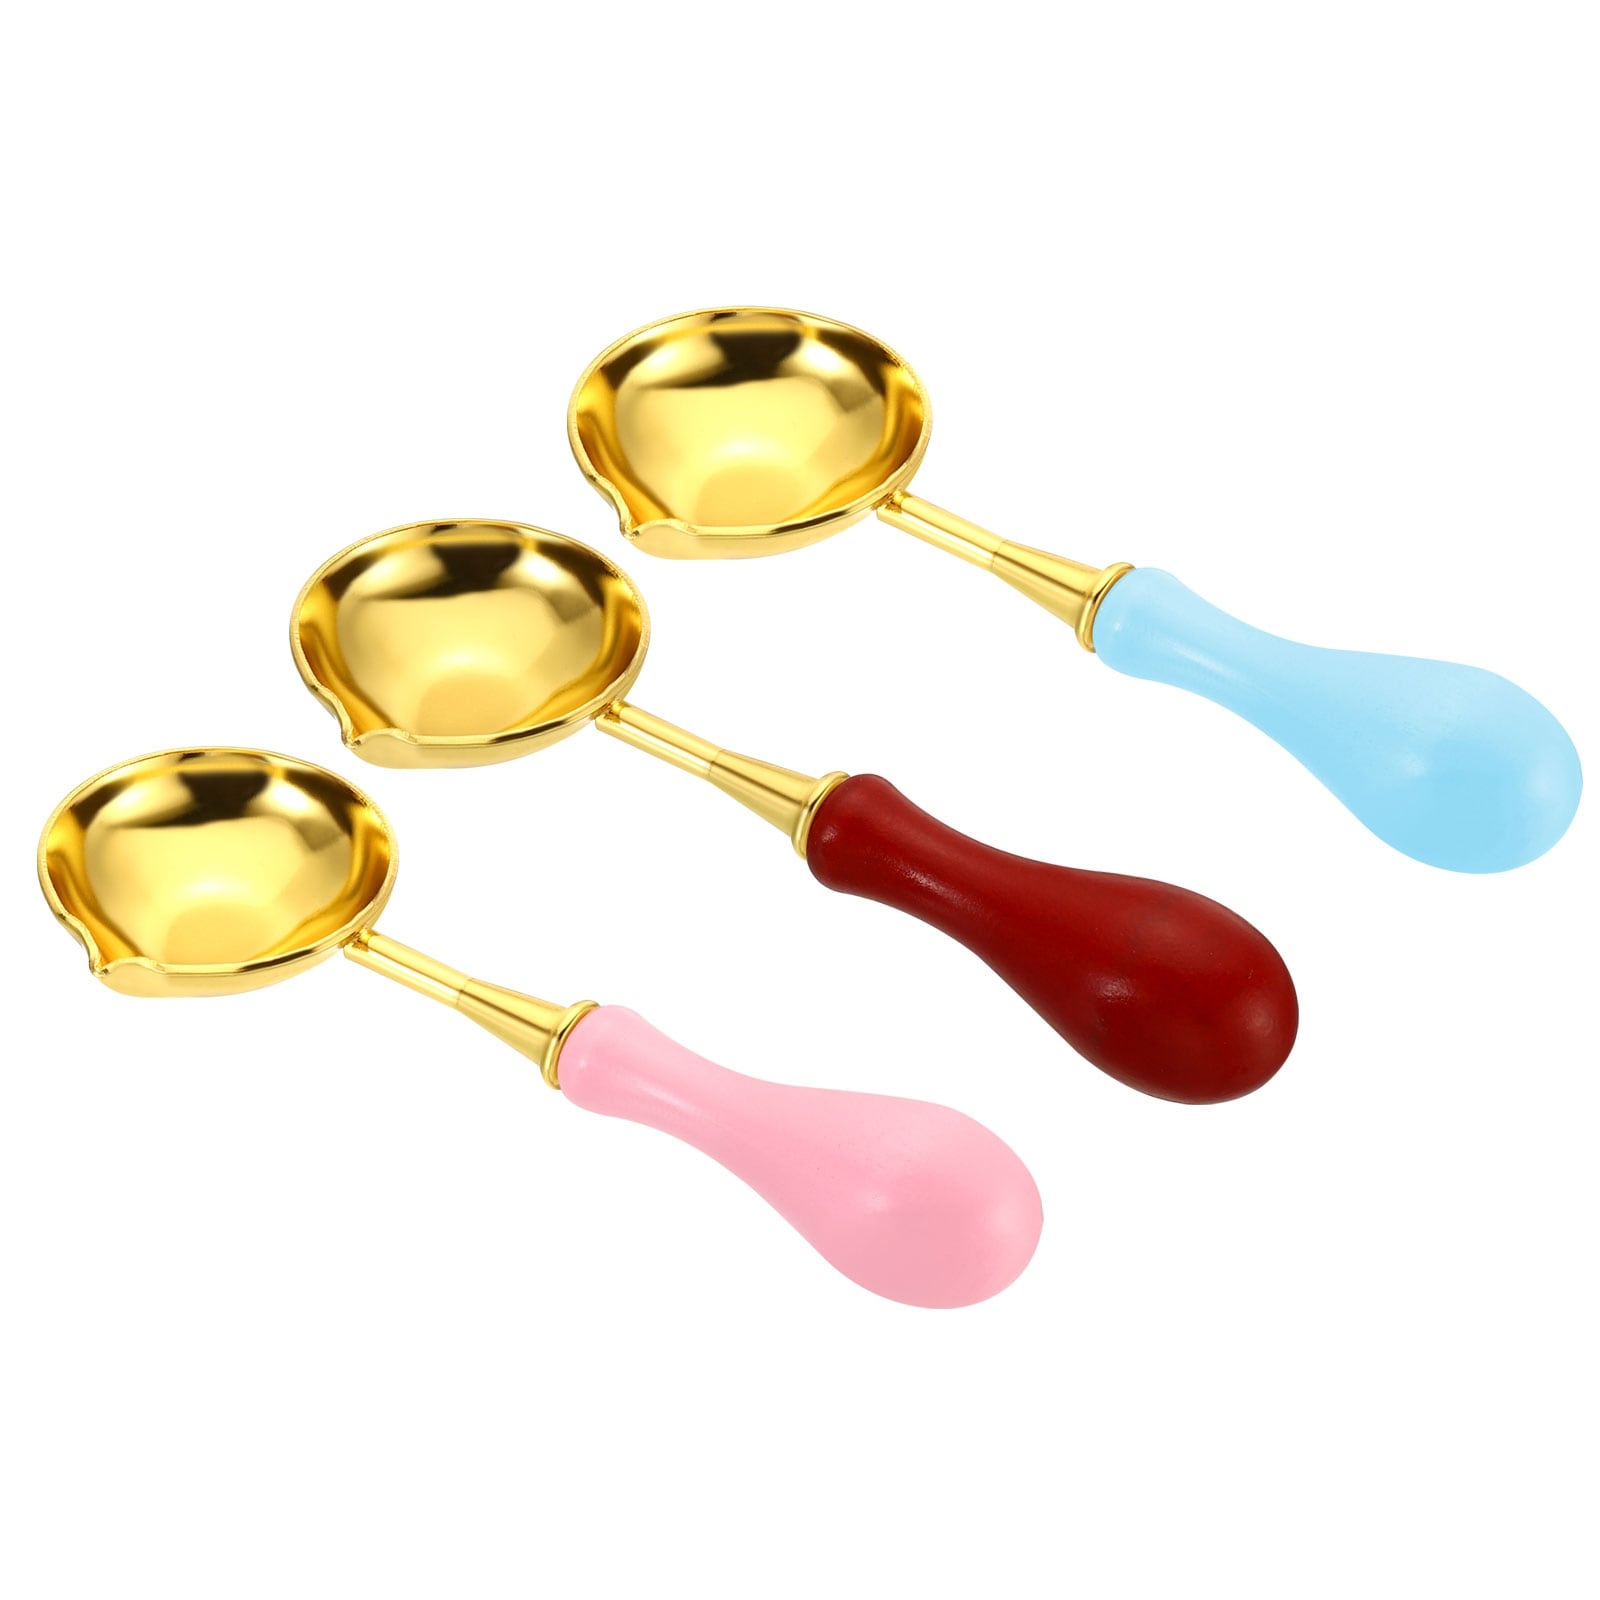 4 Wax Seal Spoon Melting Spoon Vintage Wooden Handle Pink, Red, Sky Blue  3Pcs - Pink, Red, Sky Blue - Bed Bath & Beyond - 37501242